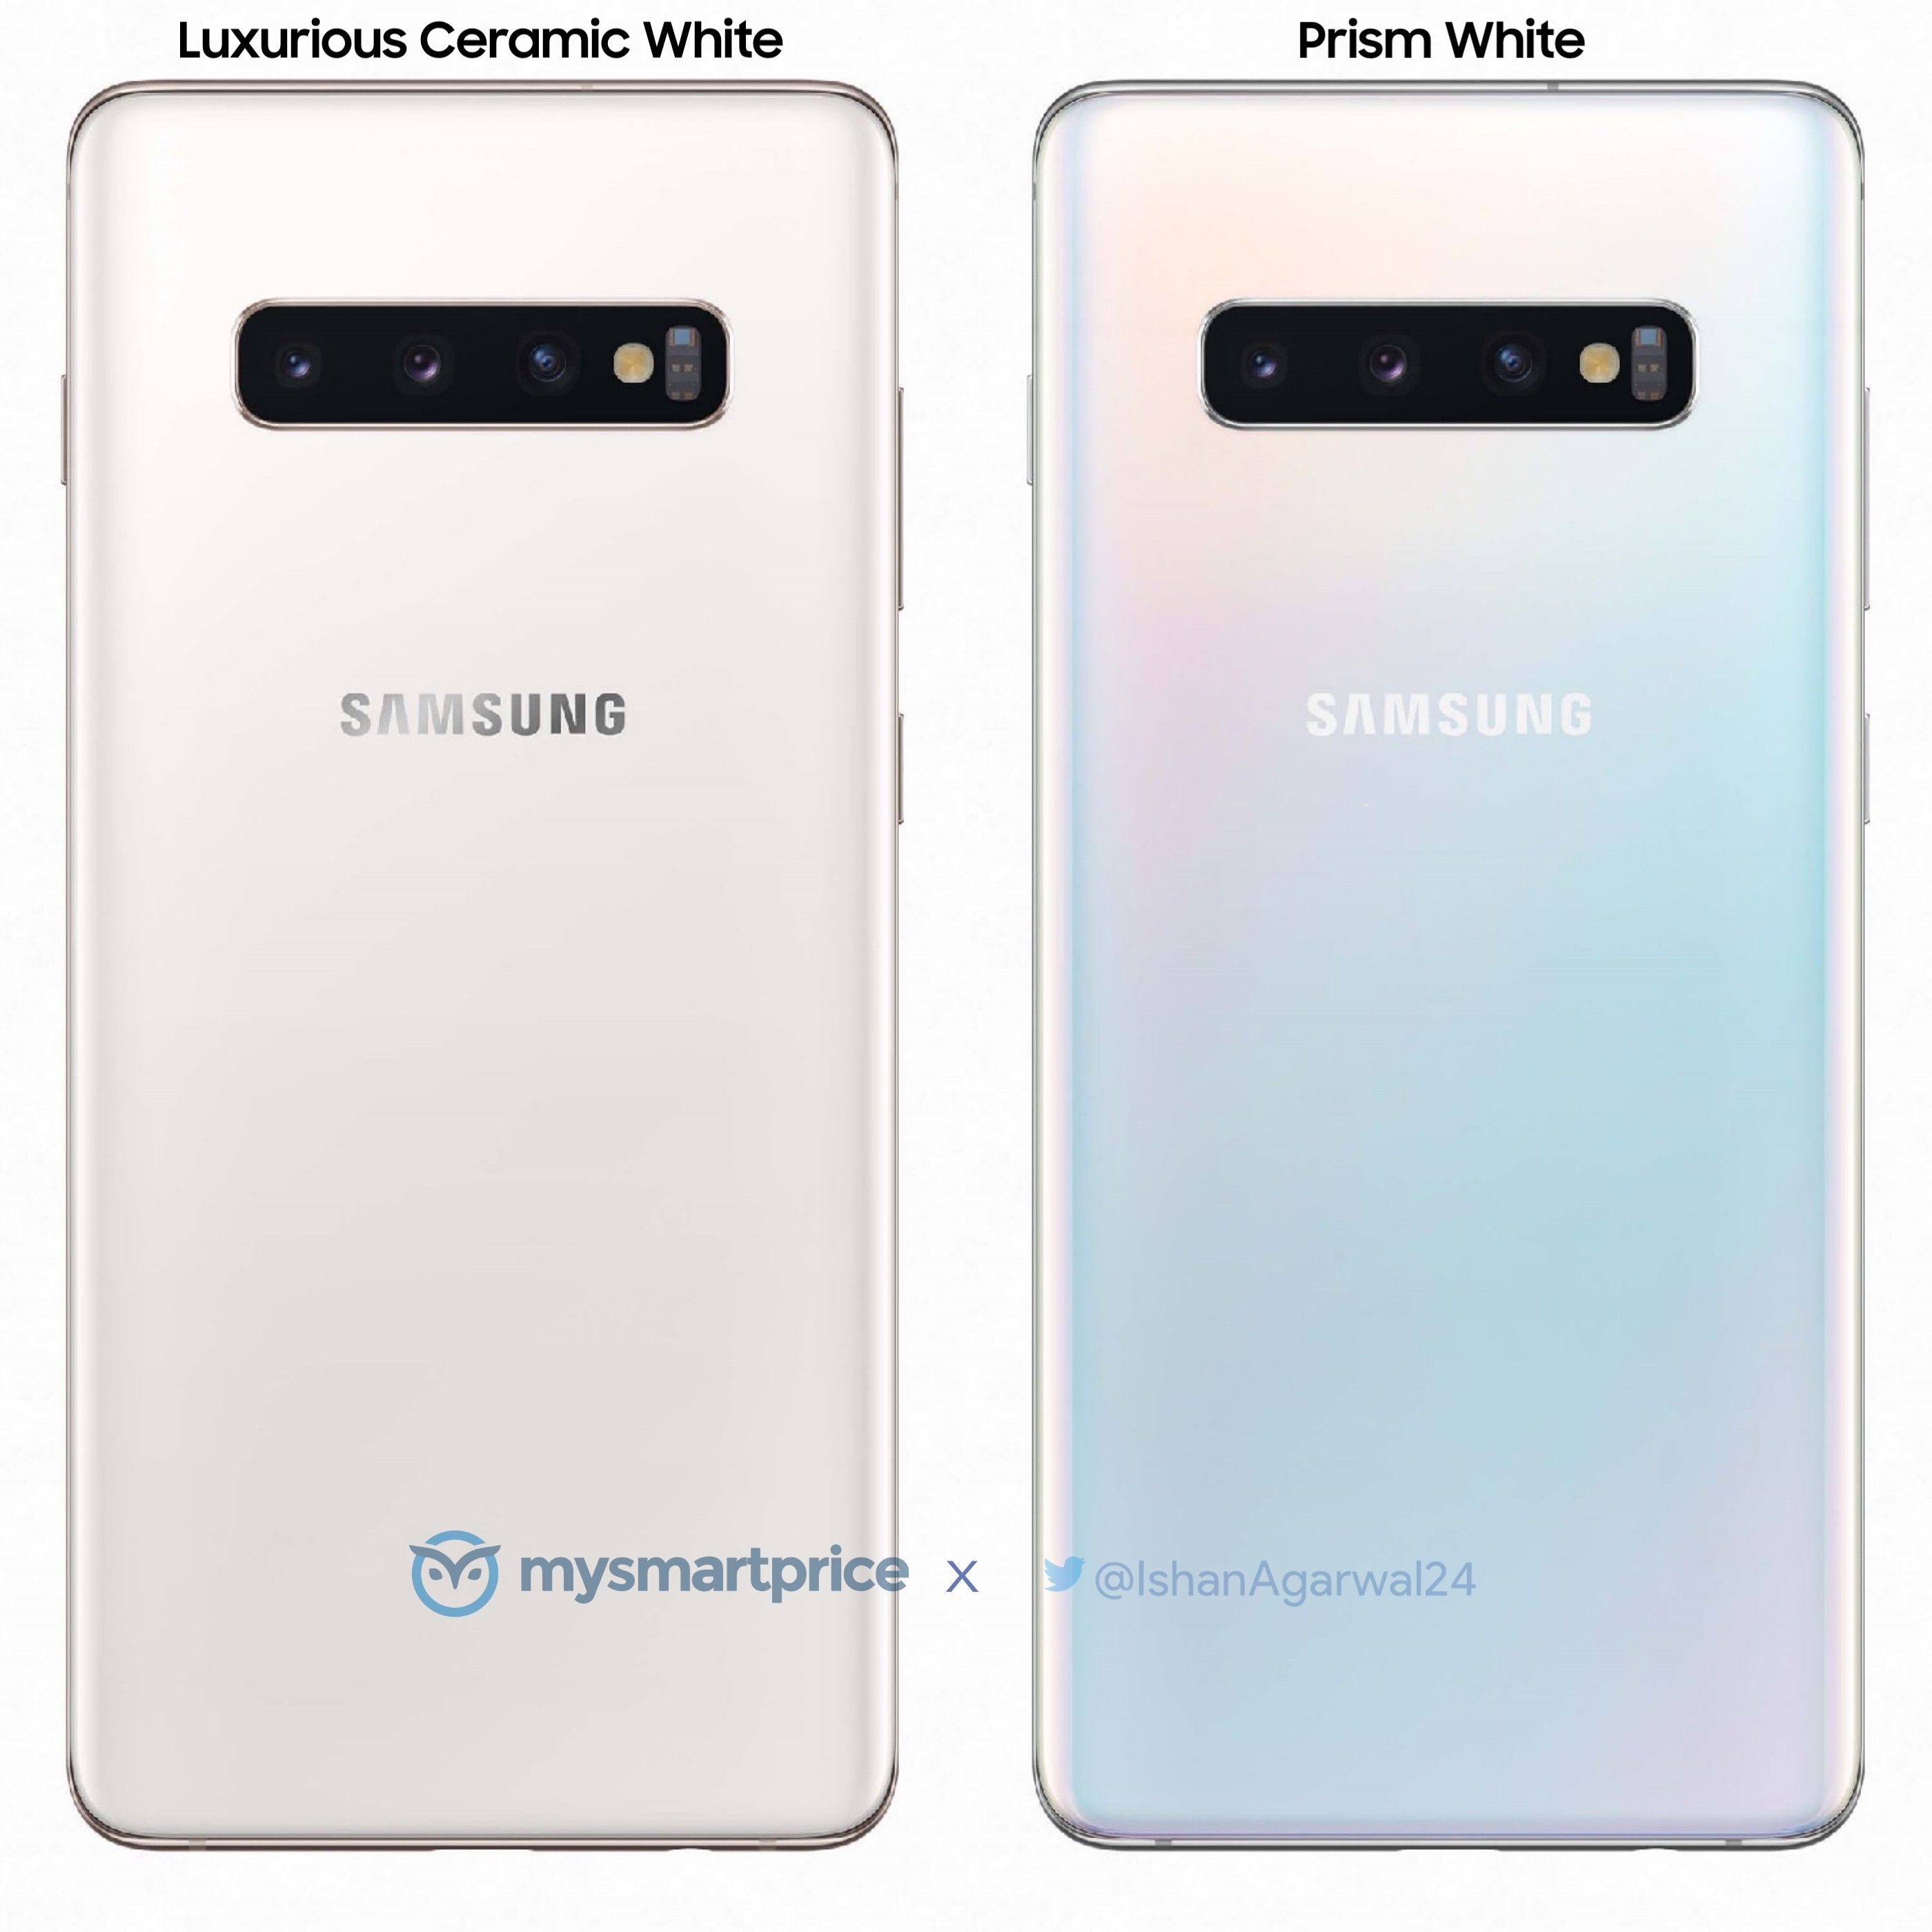 Latest Galaxy S10+ leak compares the Prism and Ceramic White models